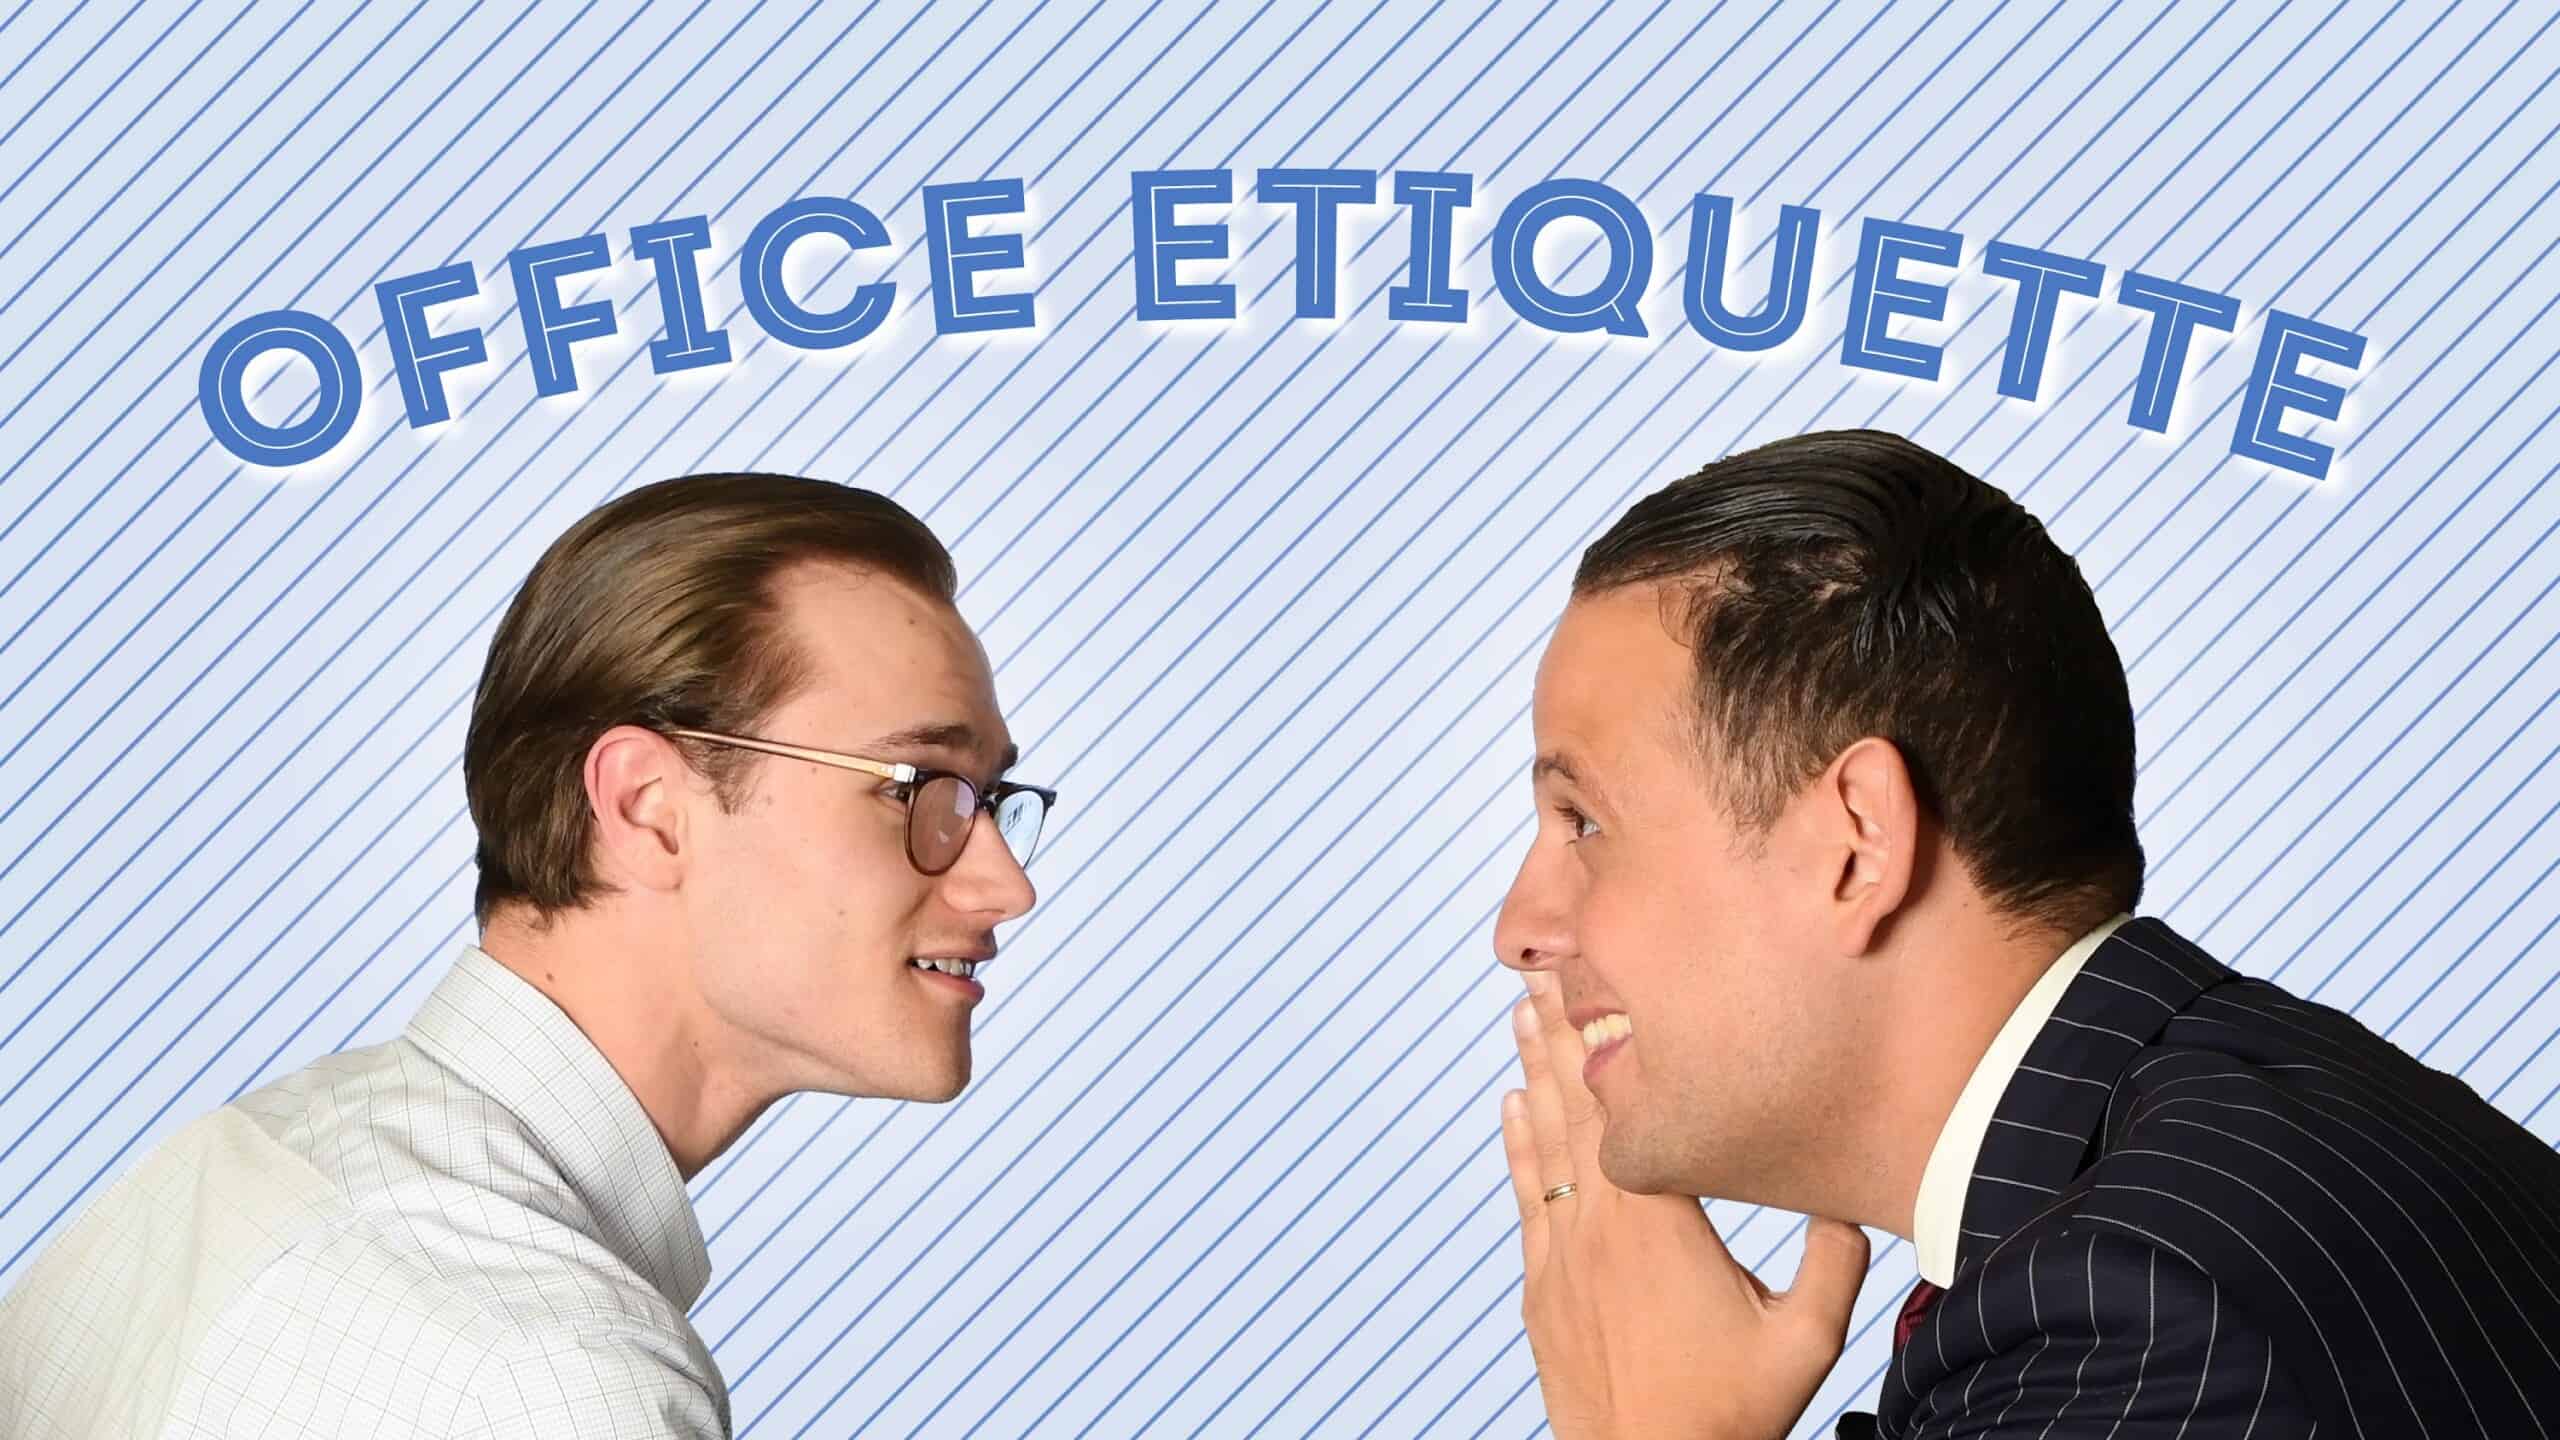 office etiquette scaled